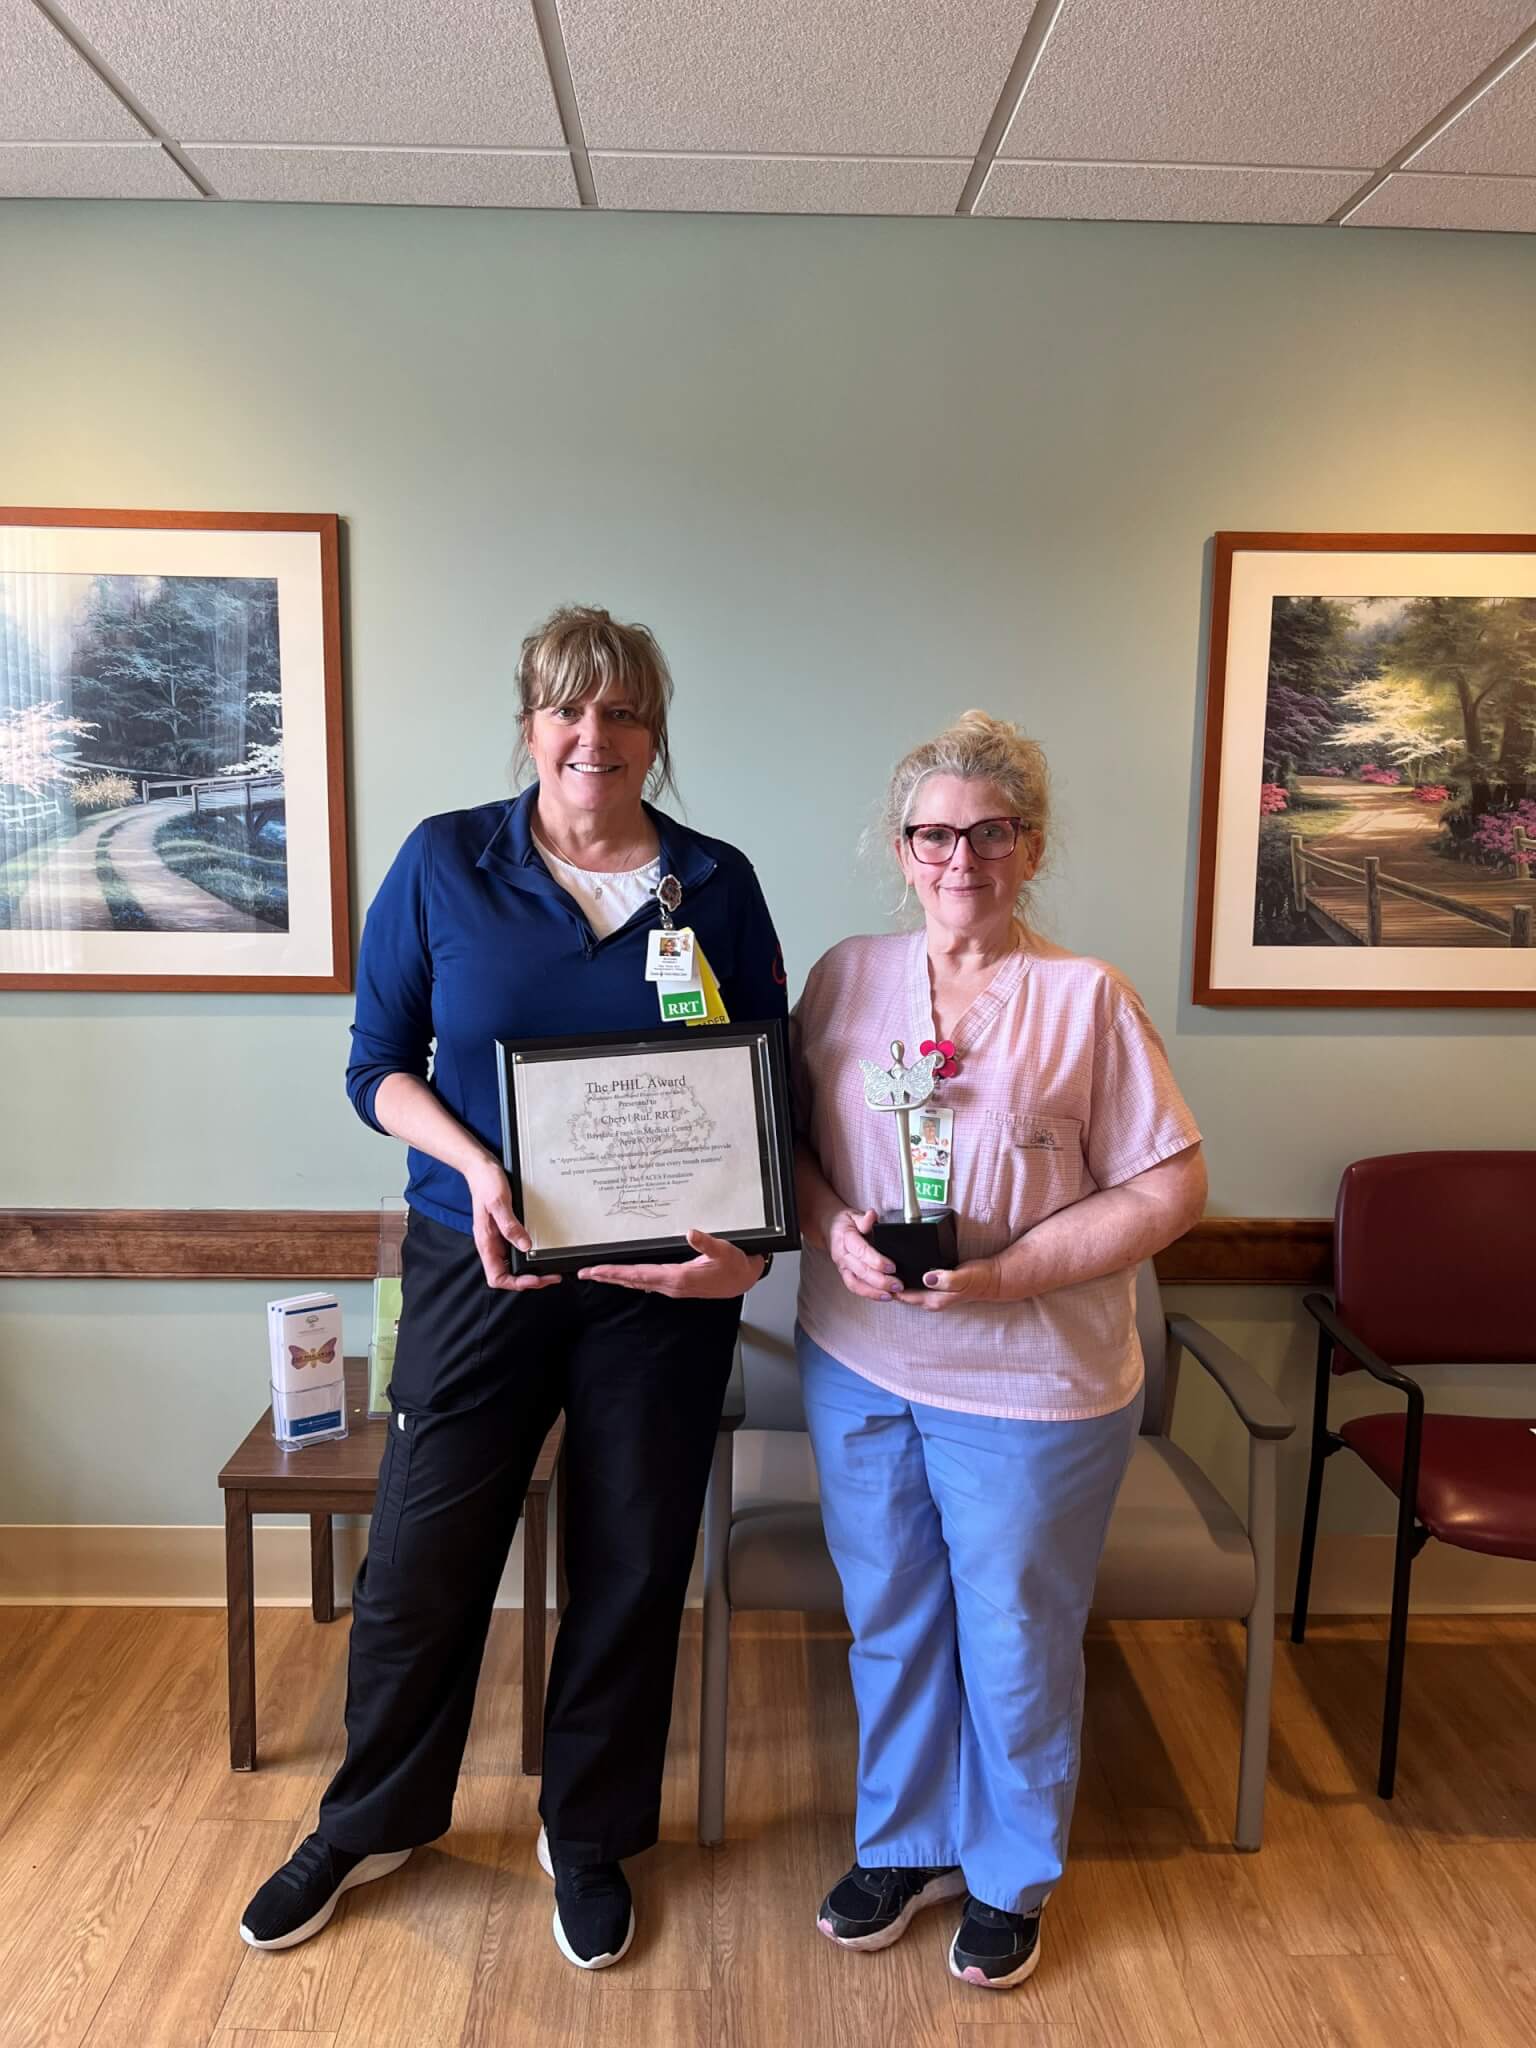 Pictured L-R: Bonnie Robert, RRT Manager, and Cheryl Ruf, RRT, accepting the recent PHIL (Pulmonary Health and Illnesses of the Lung) Award recognizing Cheryl as an Outstanding Respiratory Therapist.